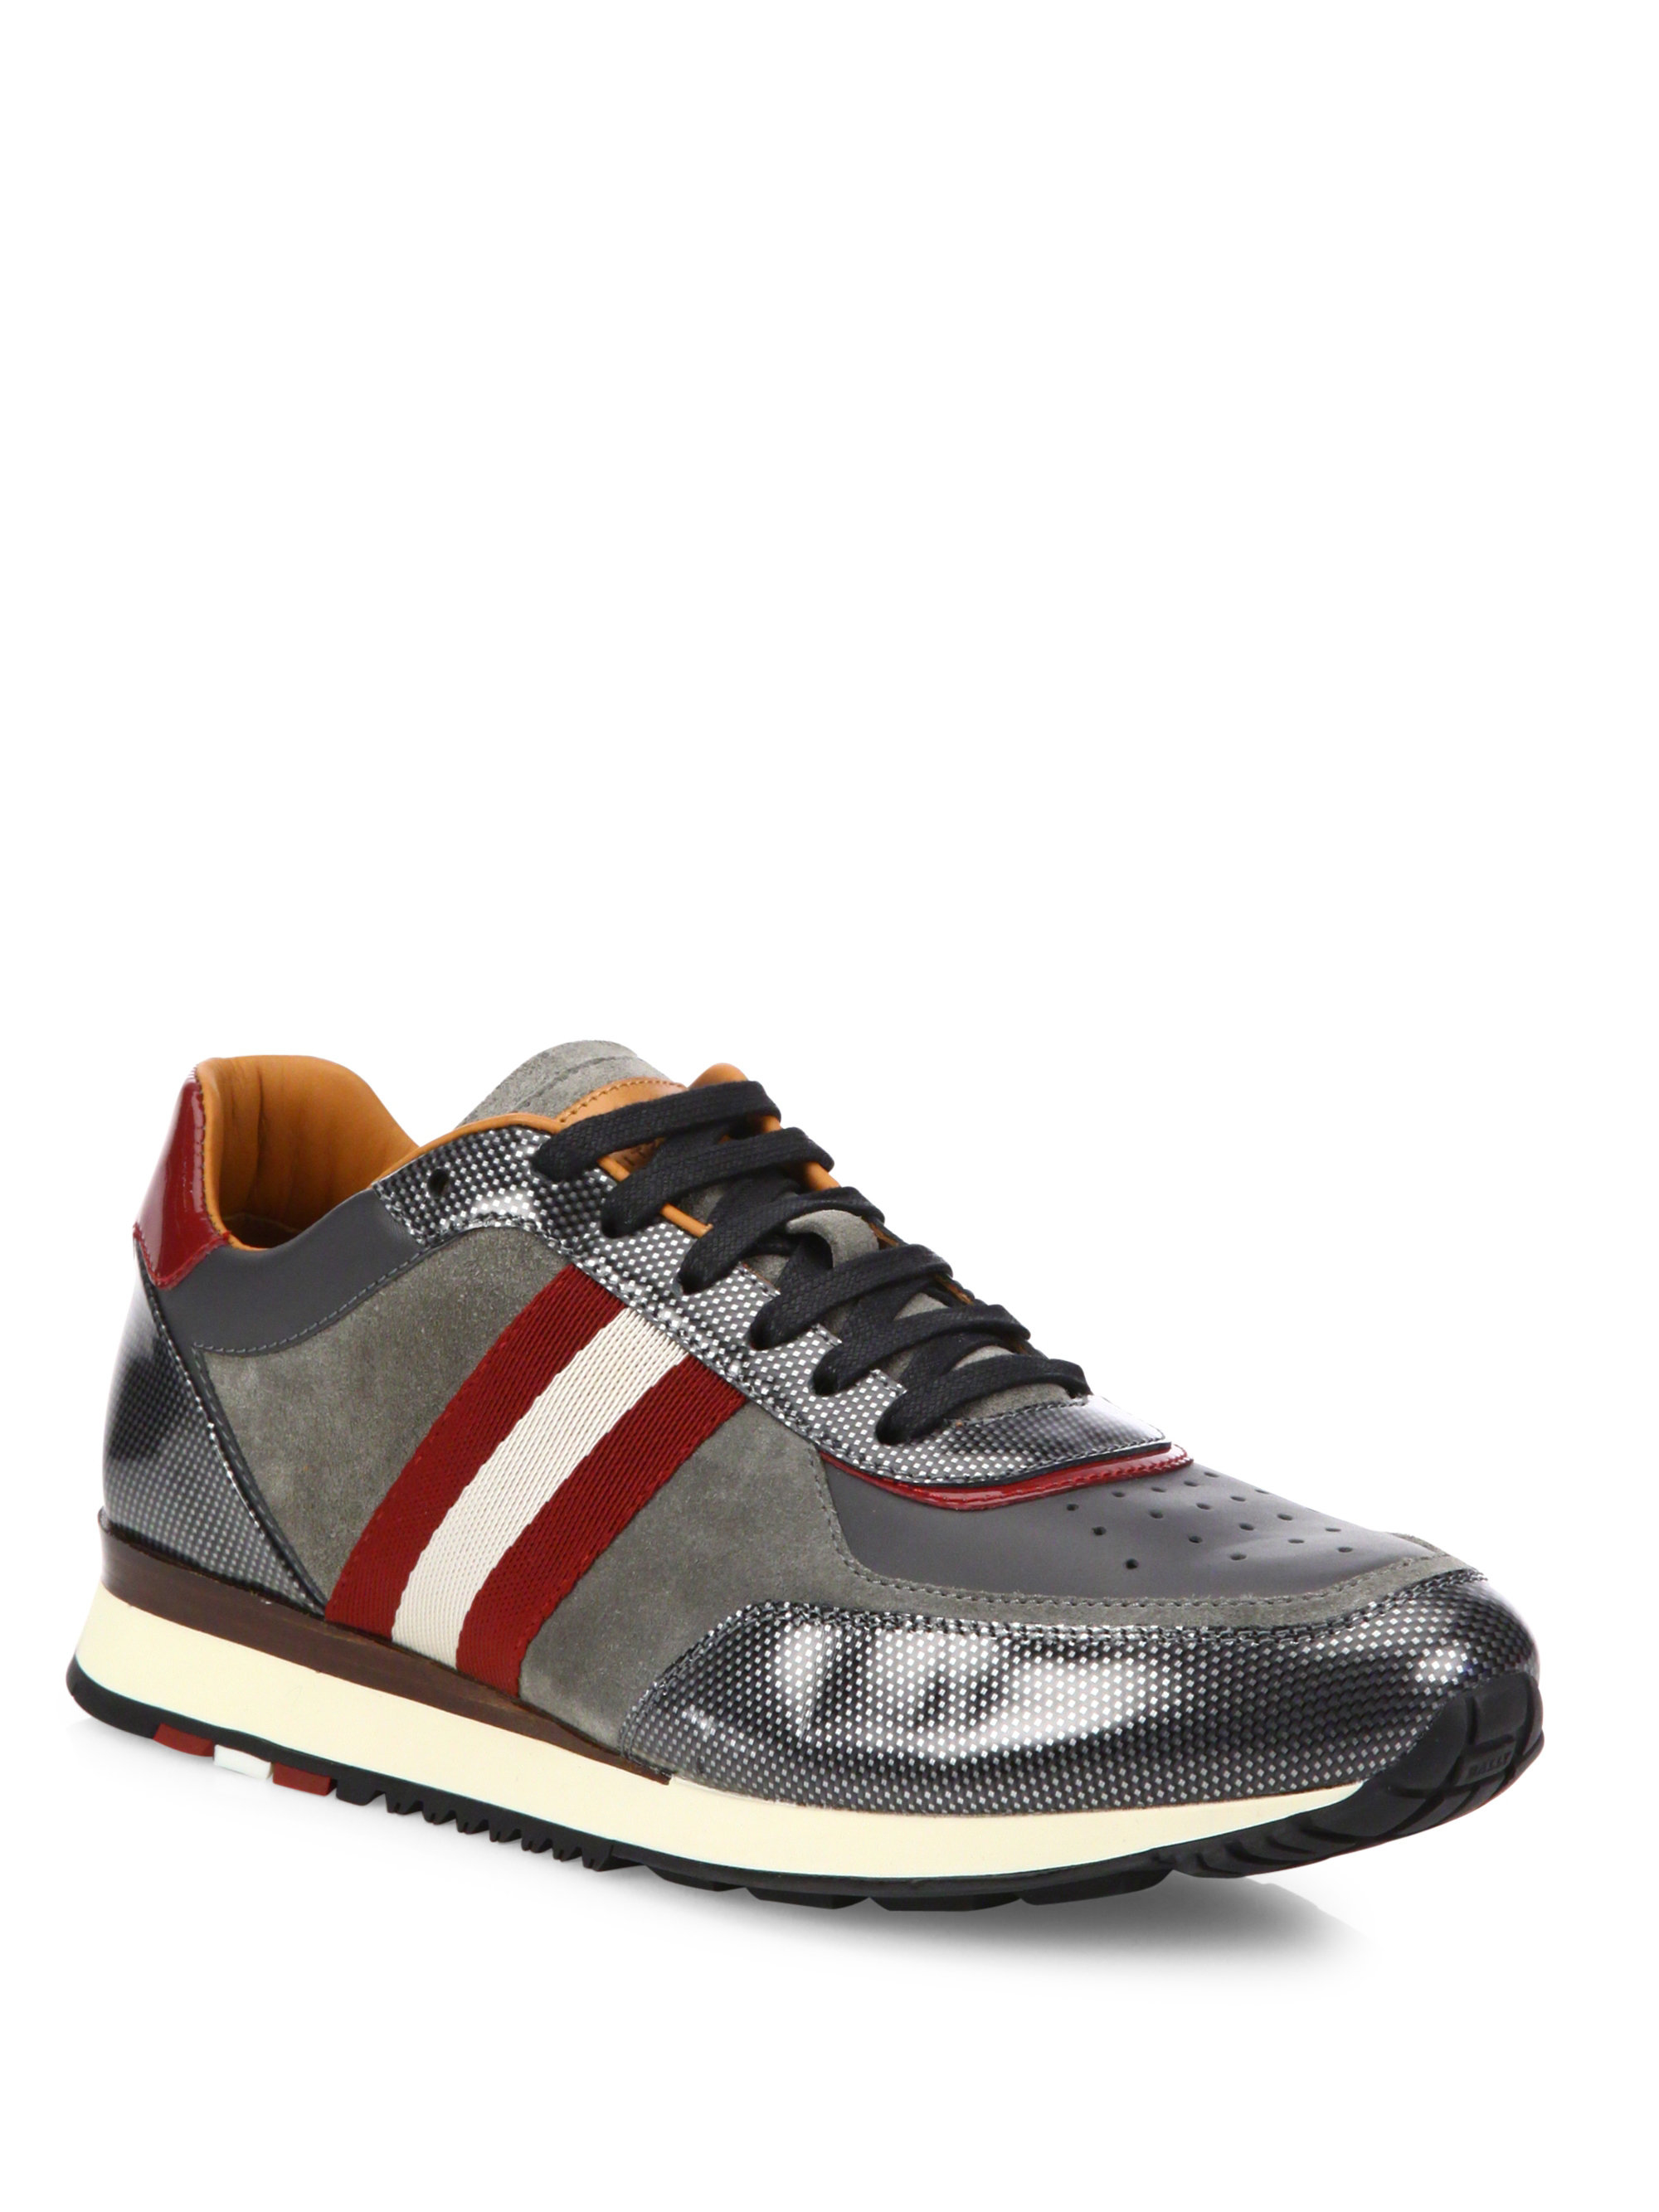 Bally Leather Trainspotting Trainer Sneakers in Carbon (Black) for Men ...